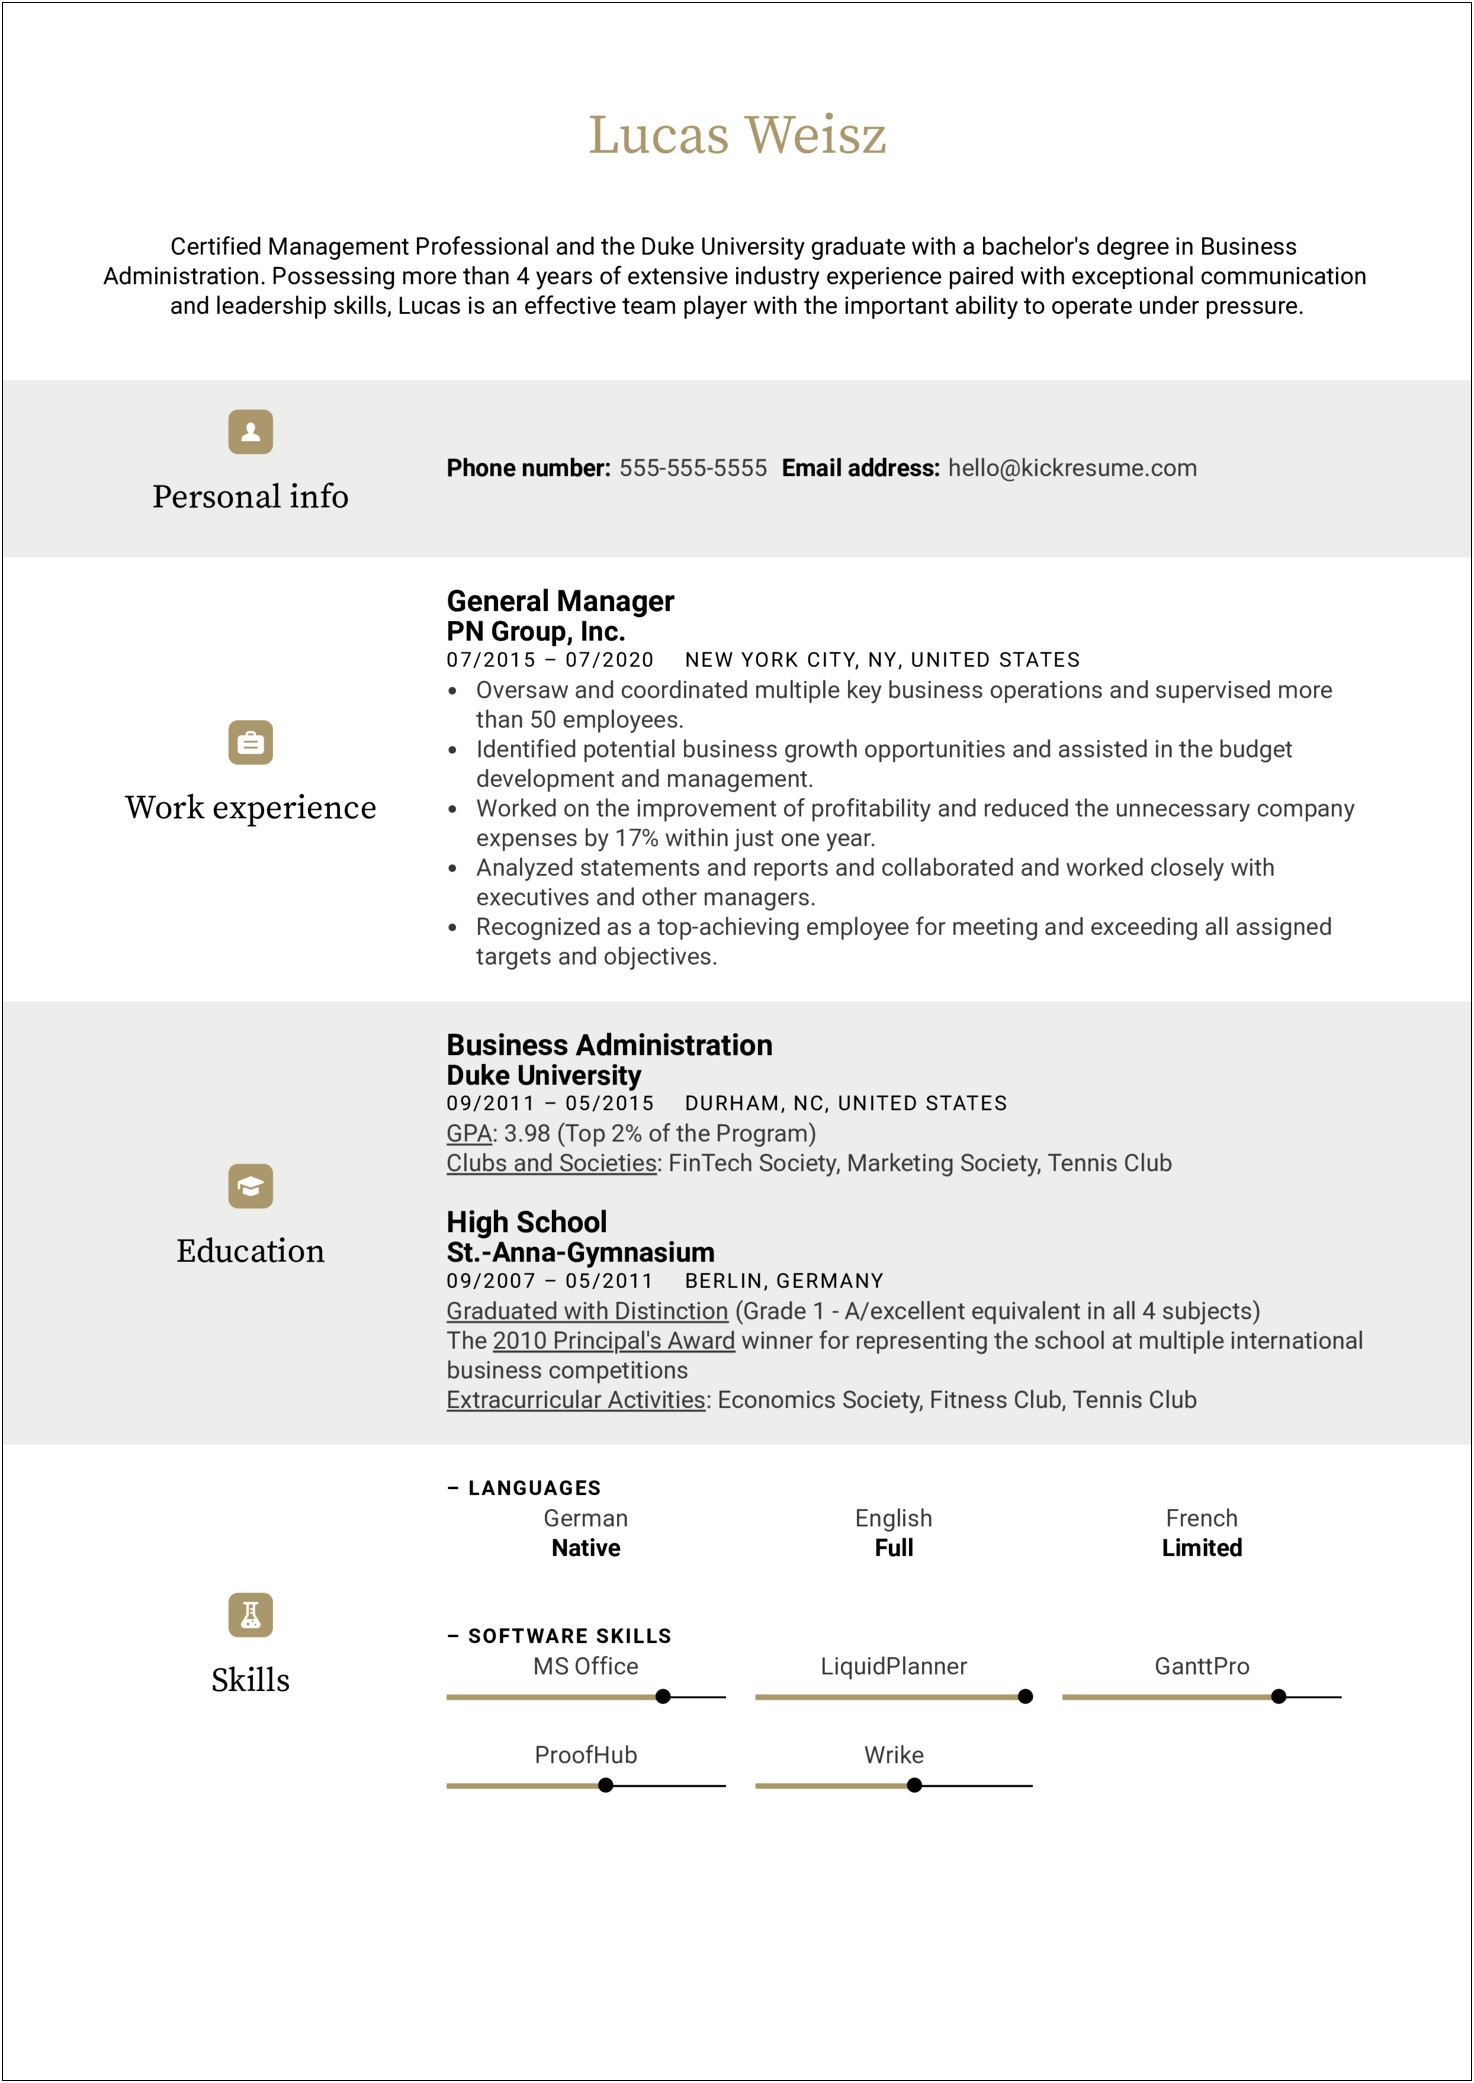 Resume With 4 Years Of Experience